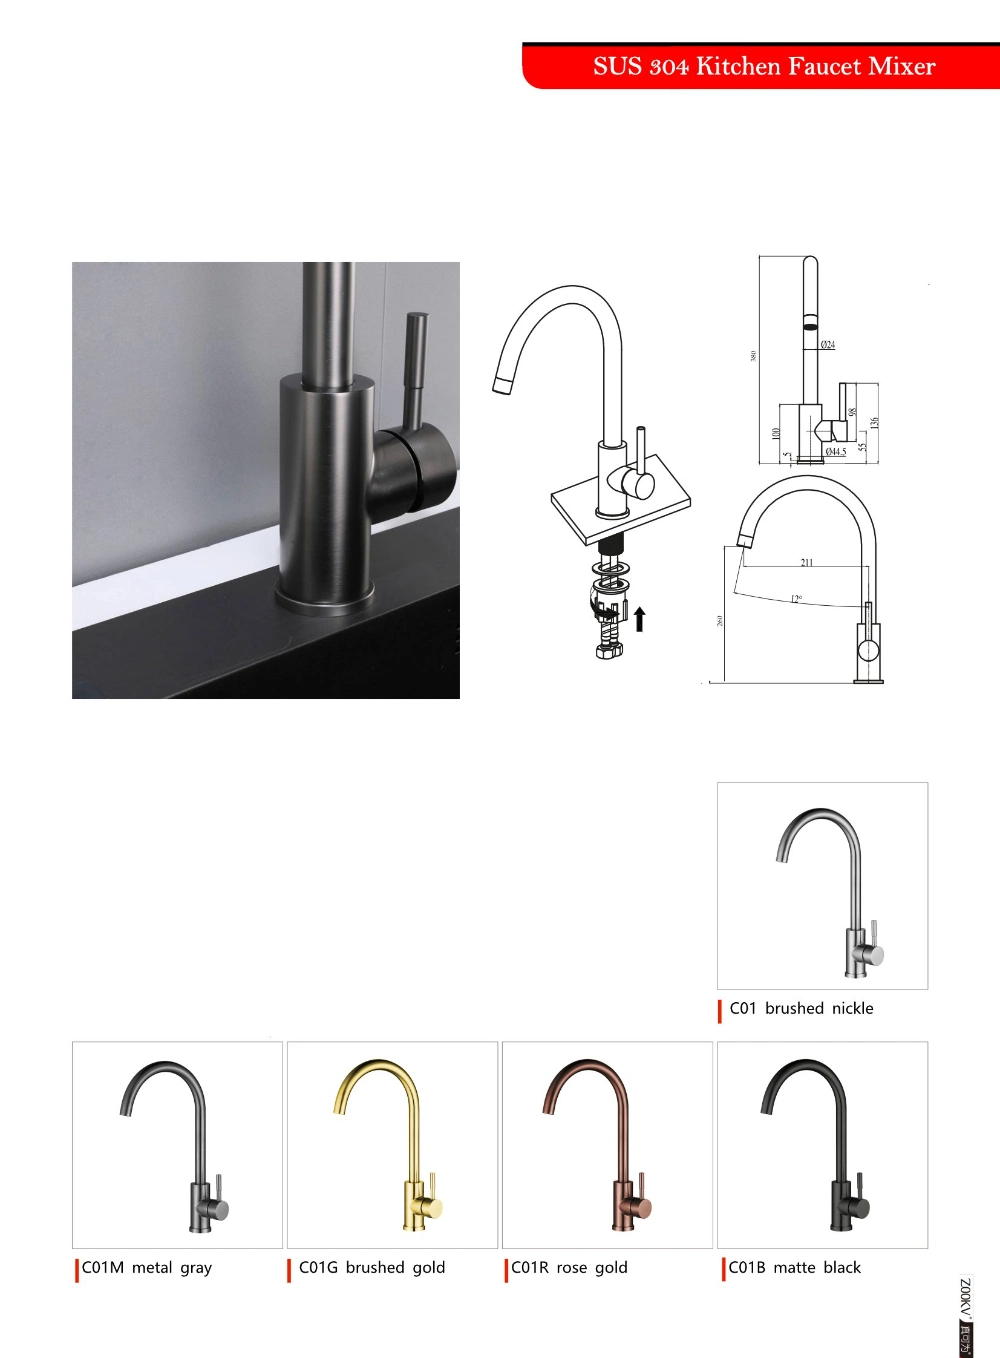 Gold Black Sanitary Ware Faucet Factory Bathroom Mixer Water Taps Kitchen Sinks Faucet Tap